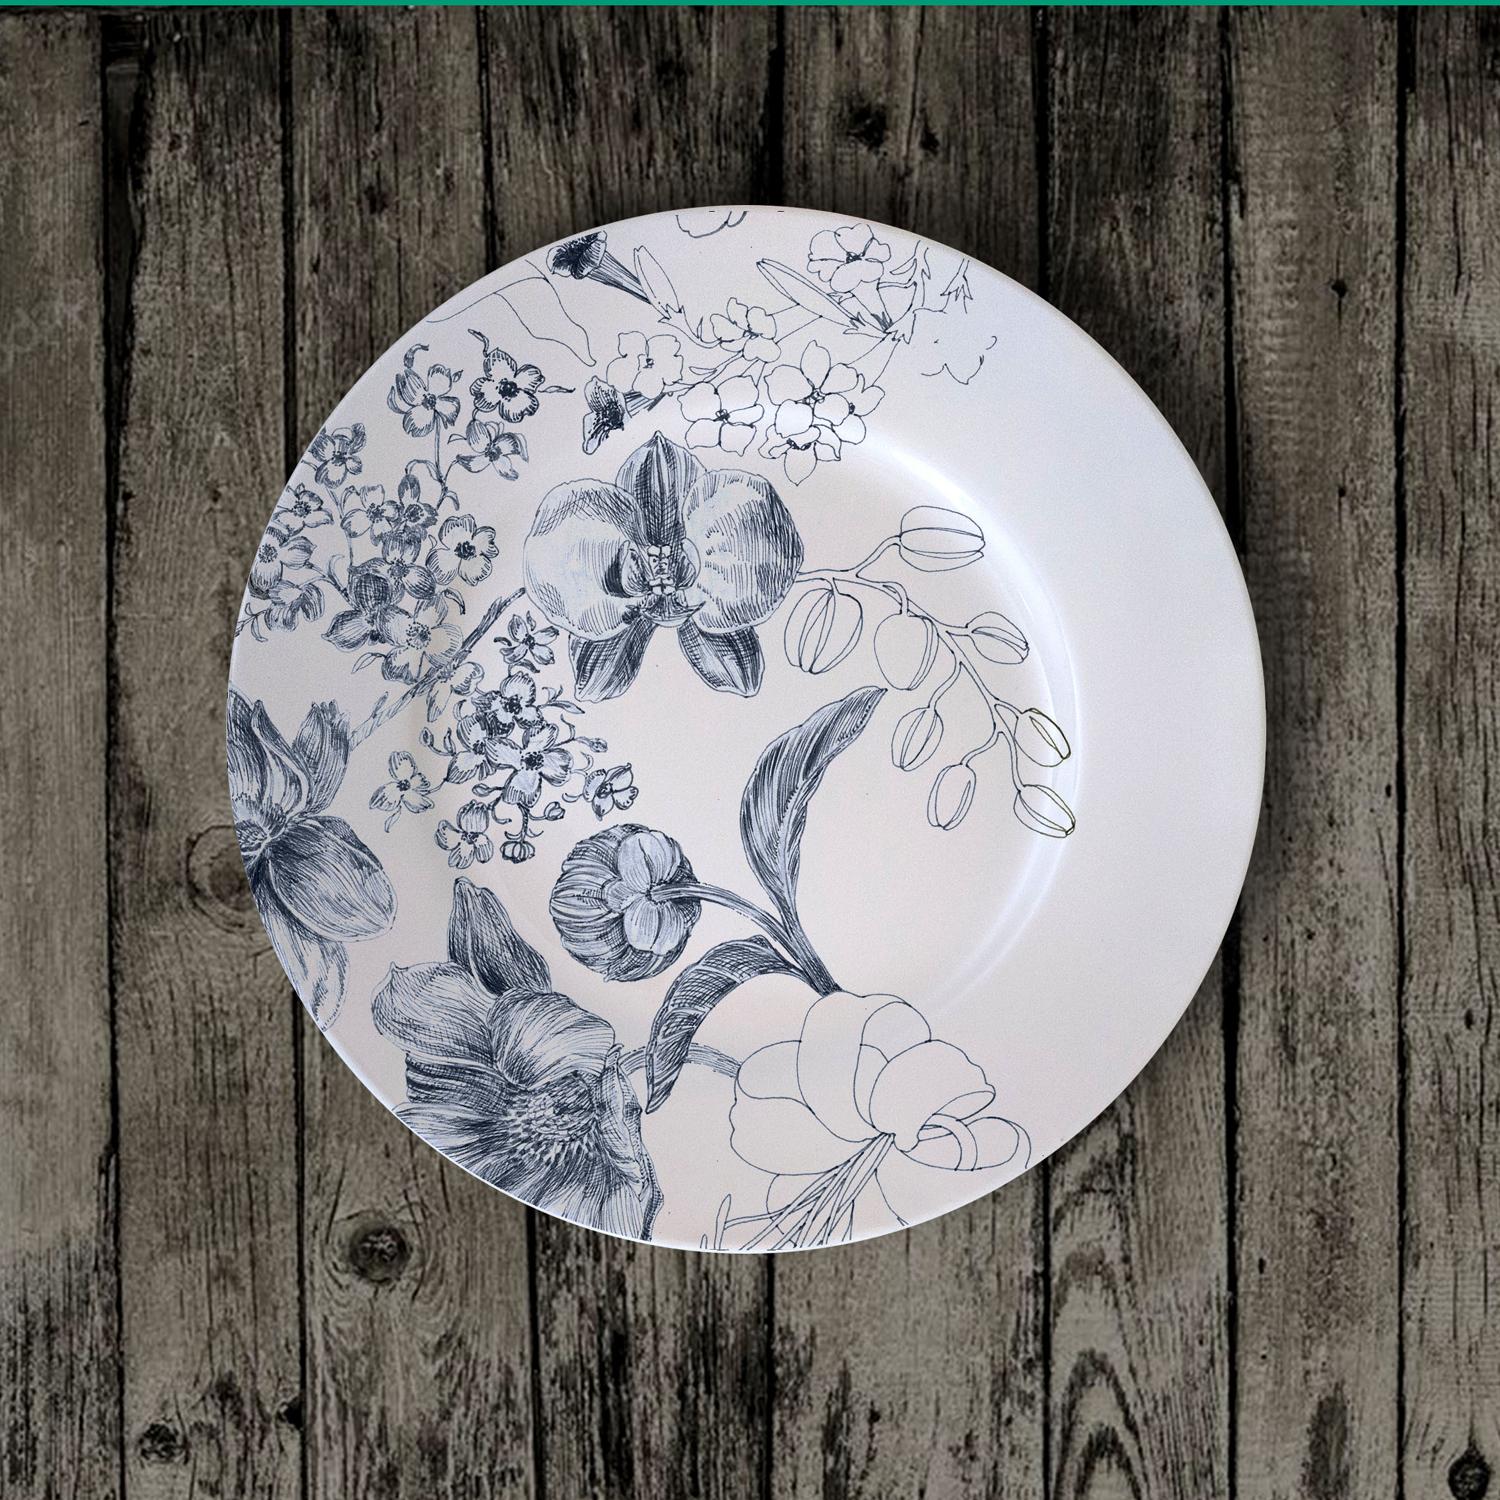 Marie Antoniette dessert plates, are designed as the porcelain set of a contemporary Queen Marie Antoniette, still alive in 2020. It is an explosion of detailed flowers and blossoms, originally hand-painted with an engraving technique that is some